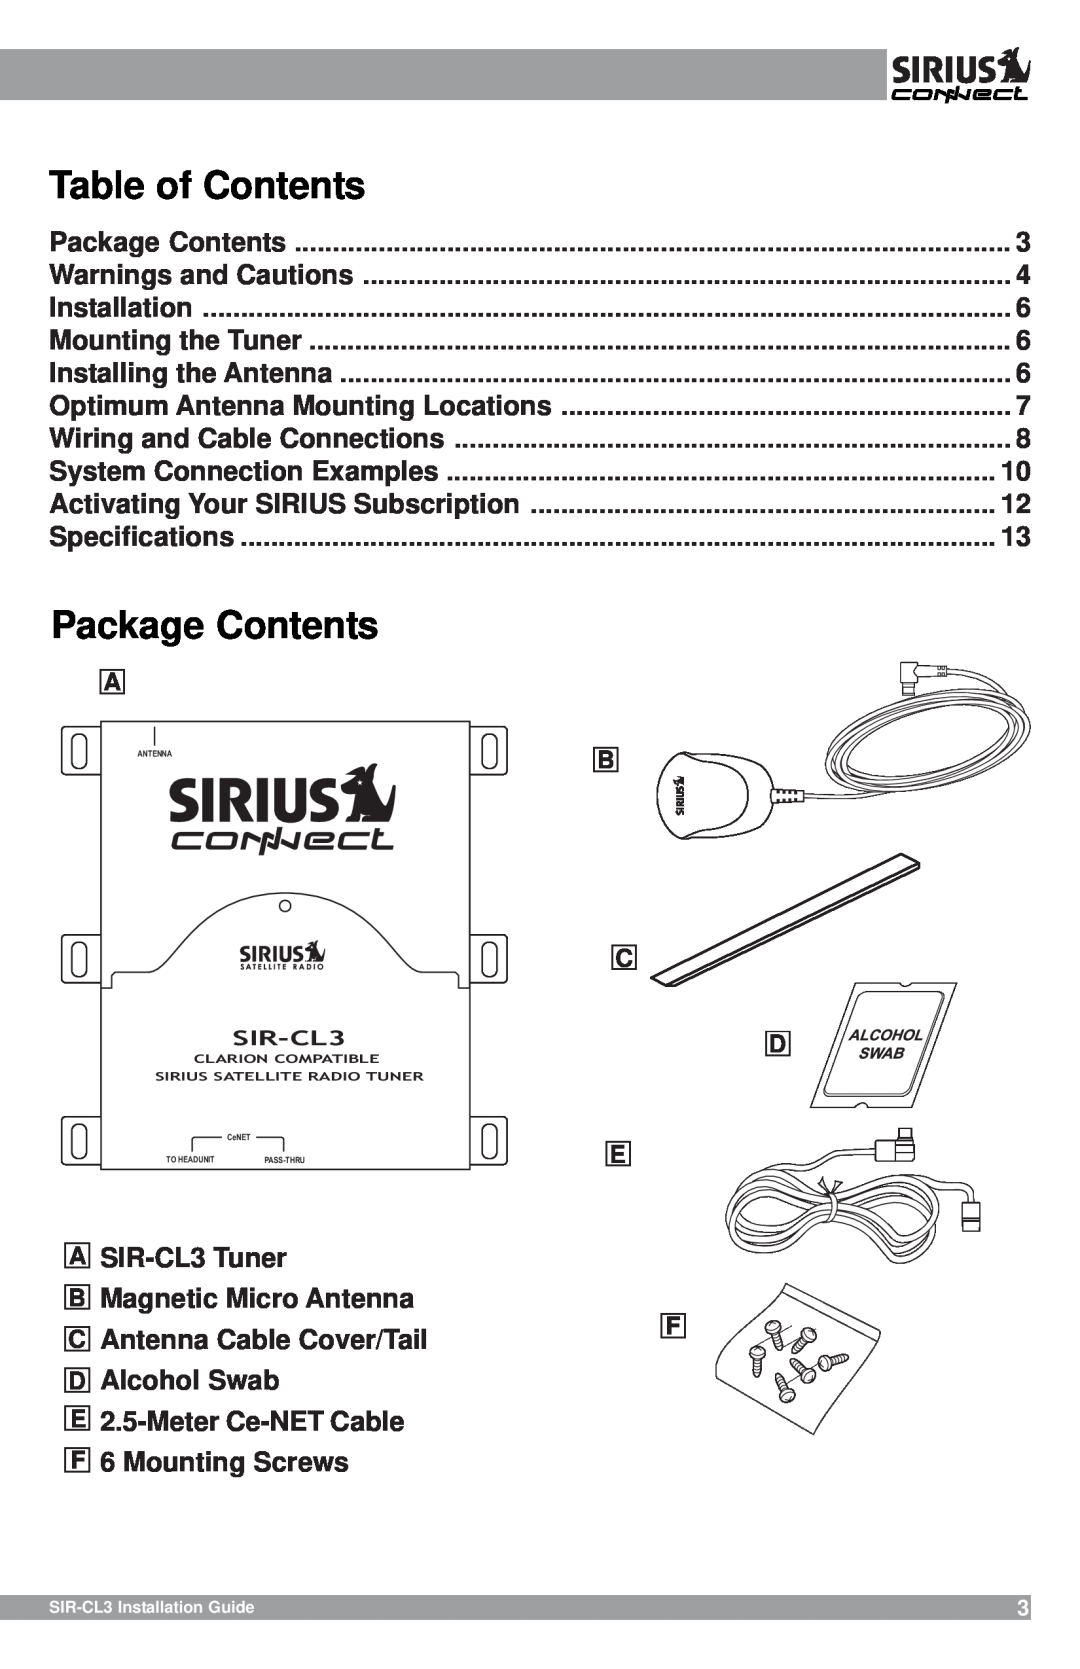 Sirius Satellite Radio SIR-CL3 manual Package Contents, Table of Contents 